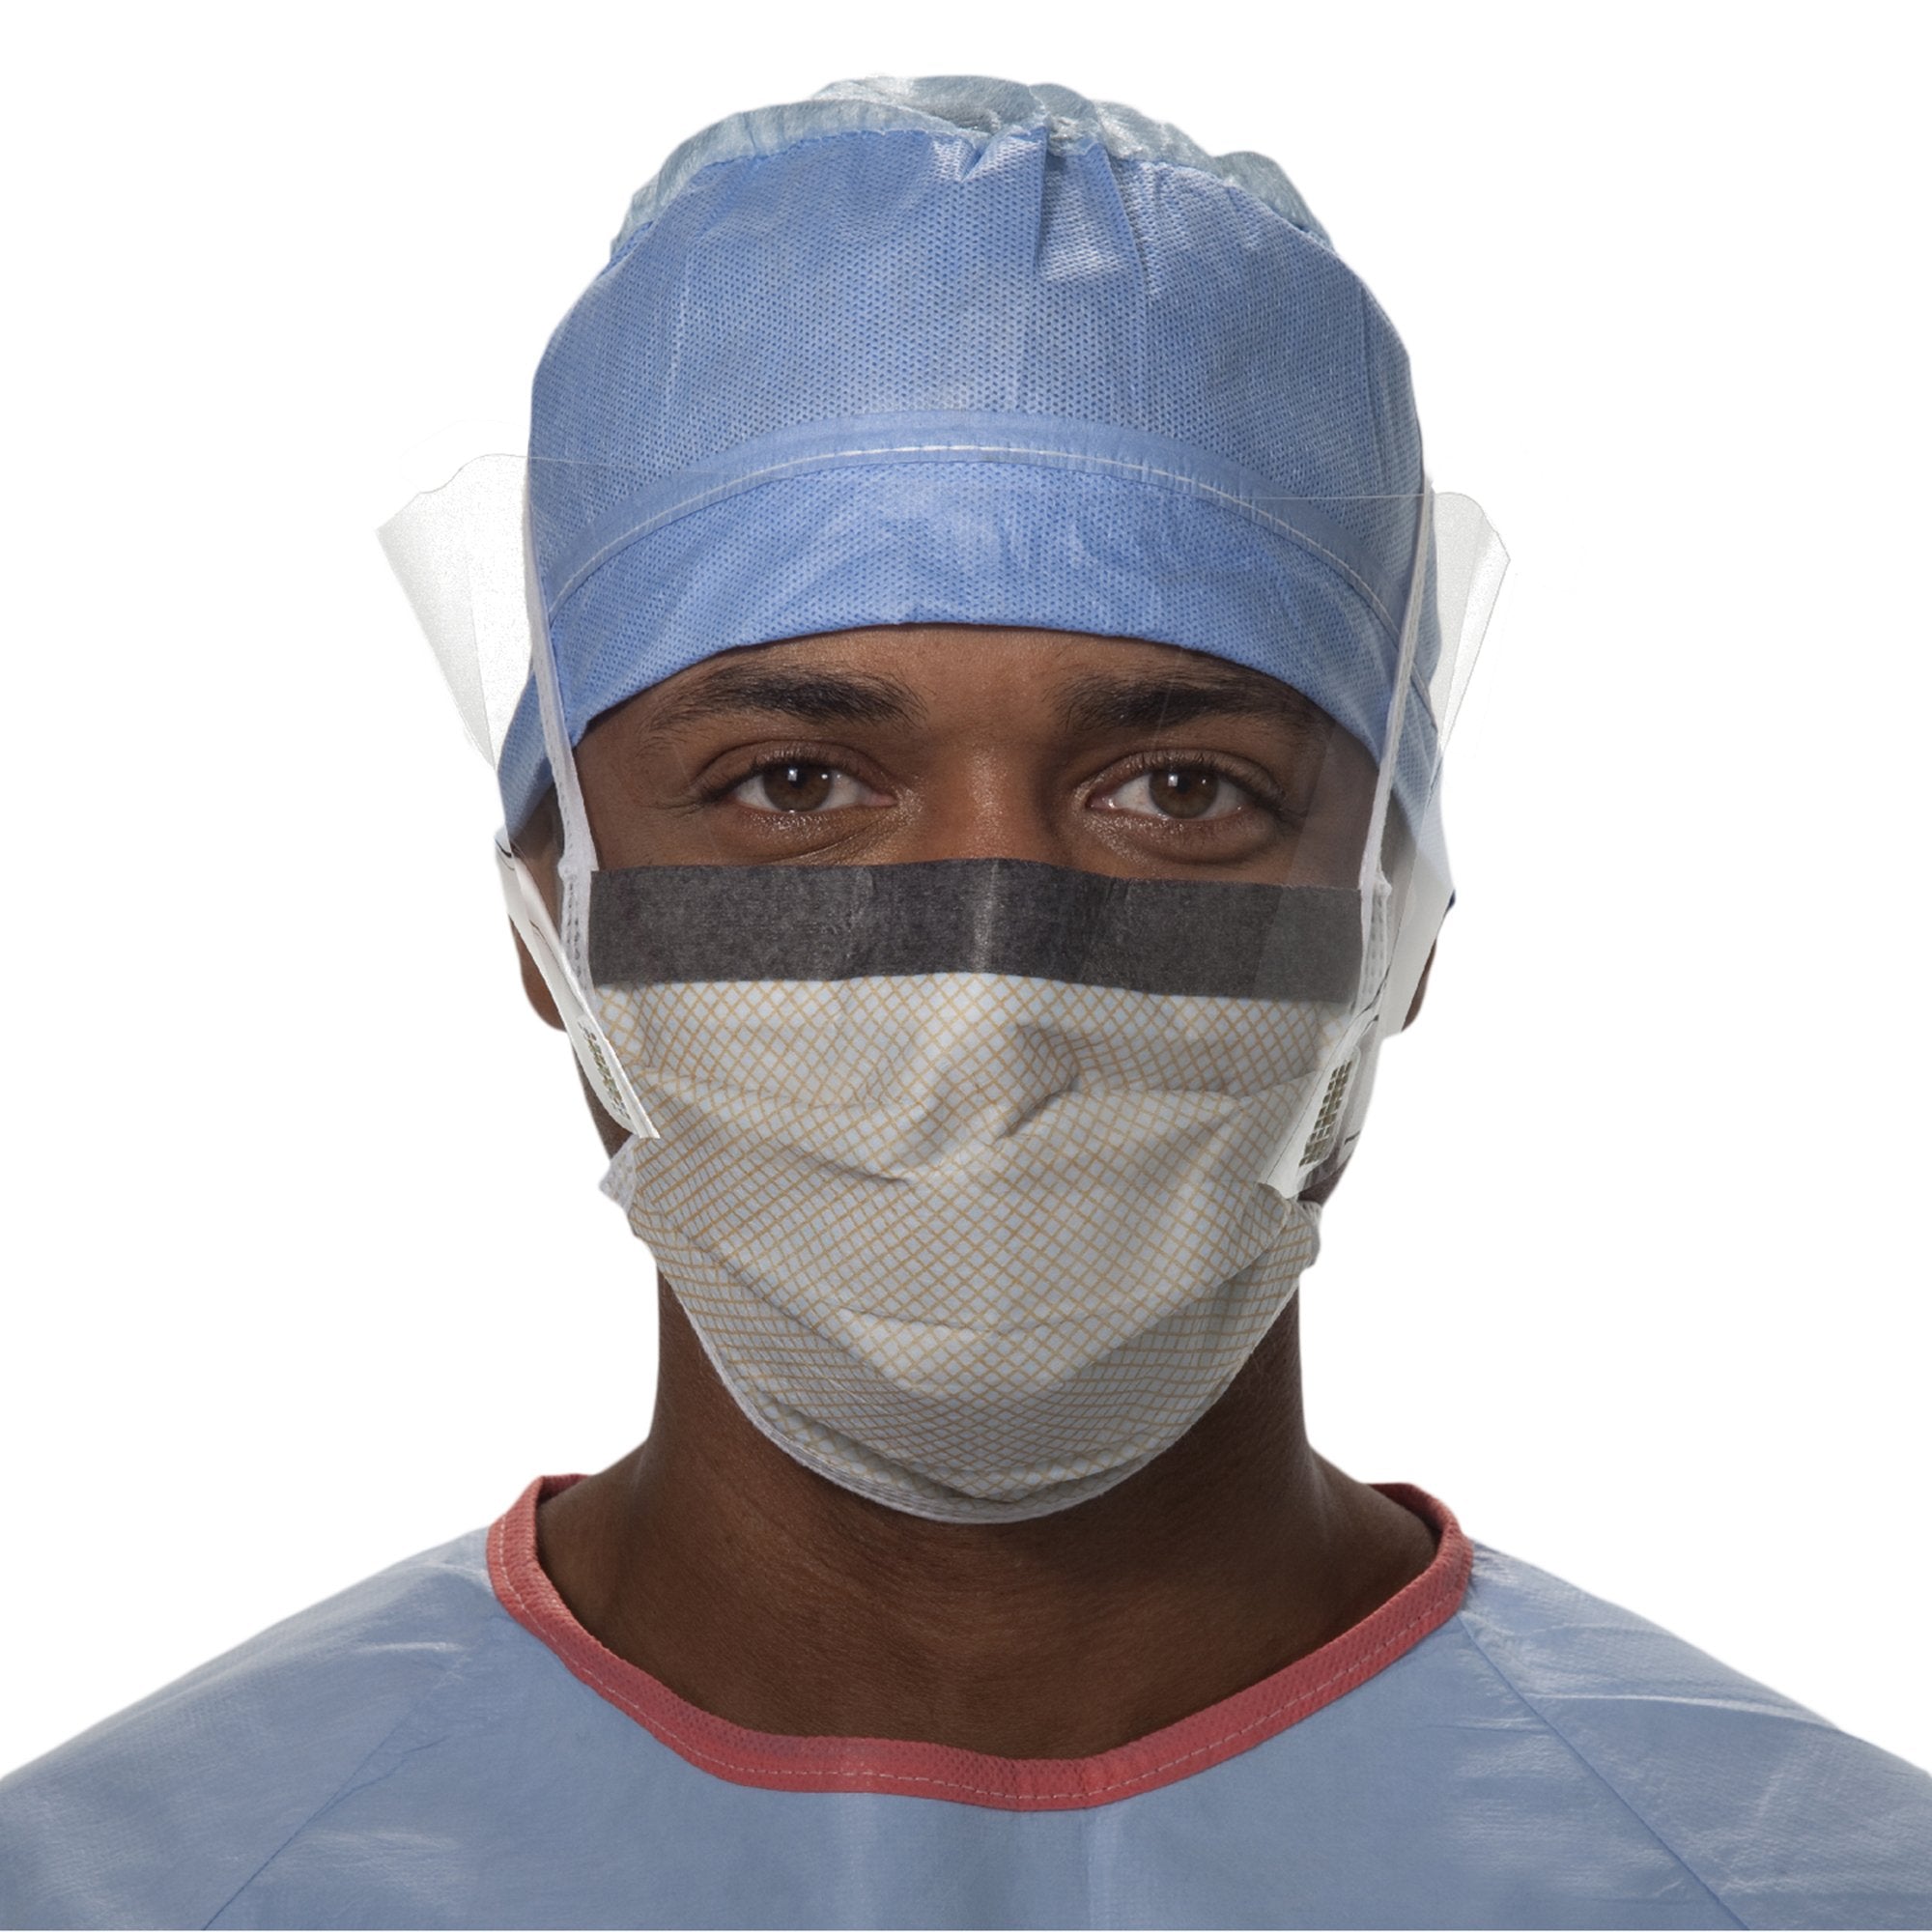 Surgical Mask with Eye Shield FluidShield Anti-fog Foam Pleated Tie Closure One Size Fits Most Blue / Orange NonSterile ASTM F2100-11 Level 2 Adult